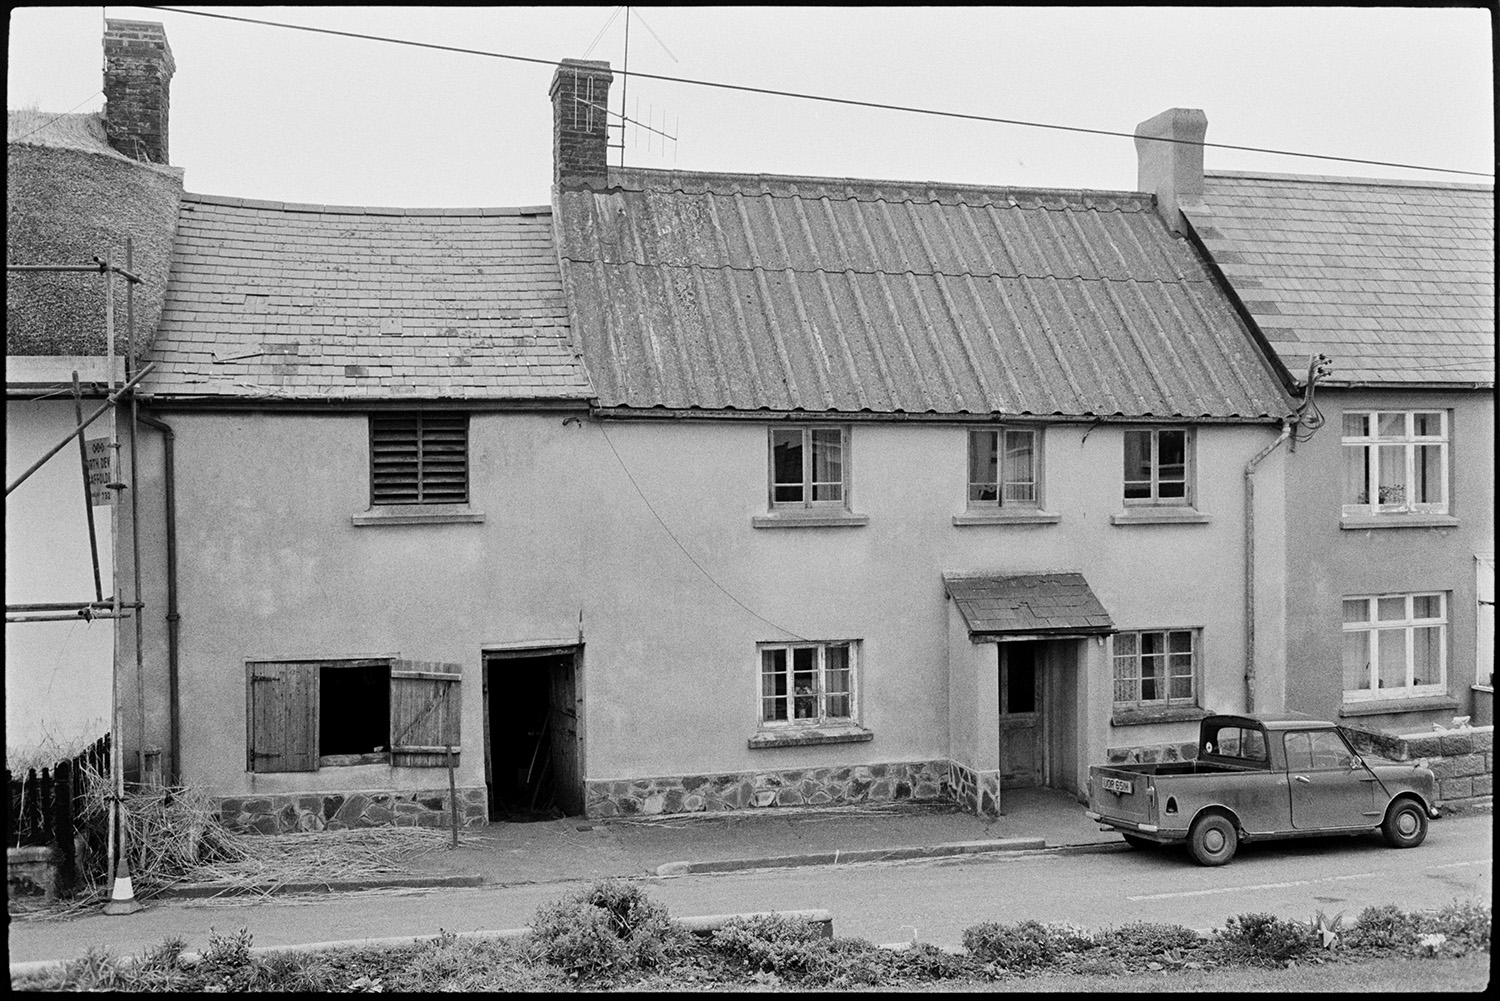 Cottages with blacksmiths shop. 
[Cottages with slate, corrugated iron and thatched roofs on a street in Atherington. The cottage with wooden shutters and slats is Mr Loosemore's Blacksmith's workshop.]